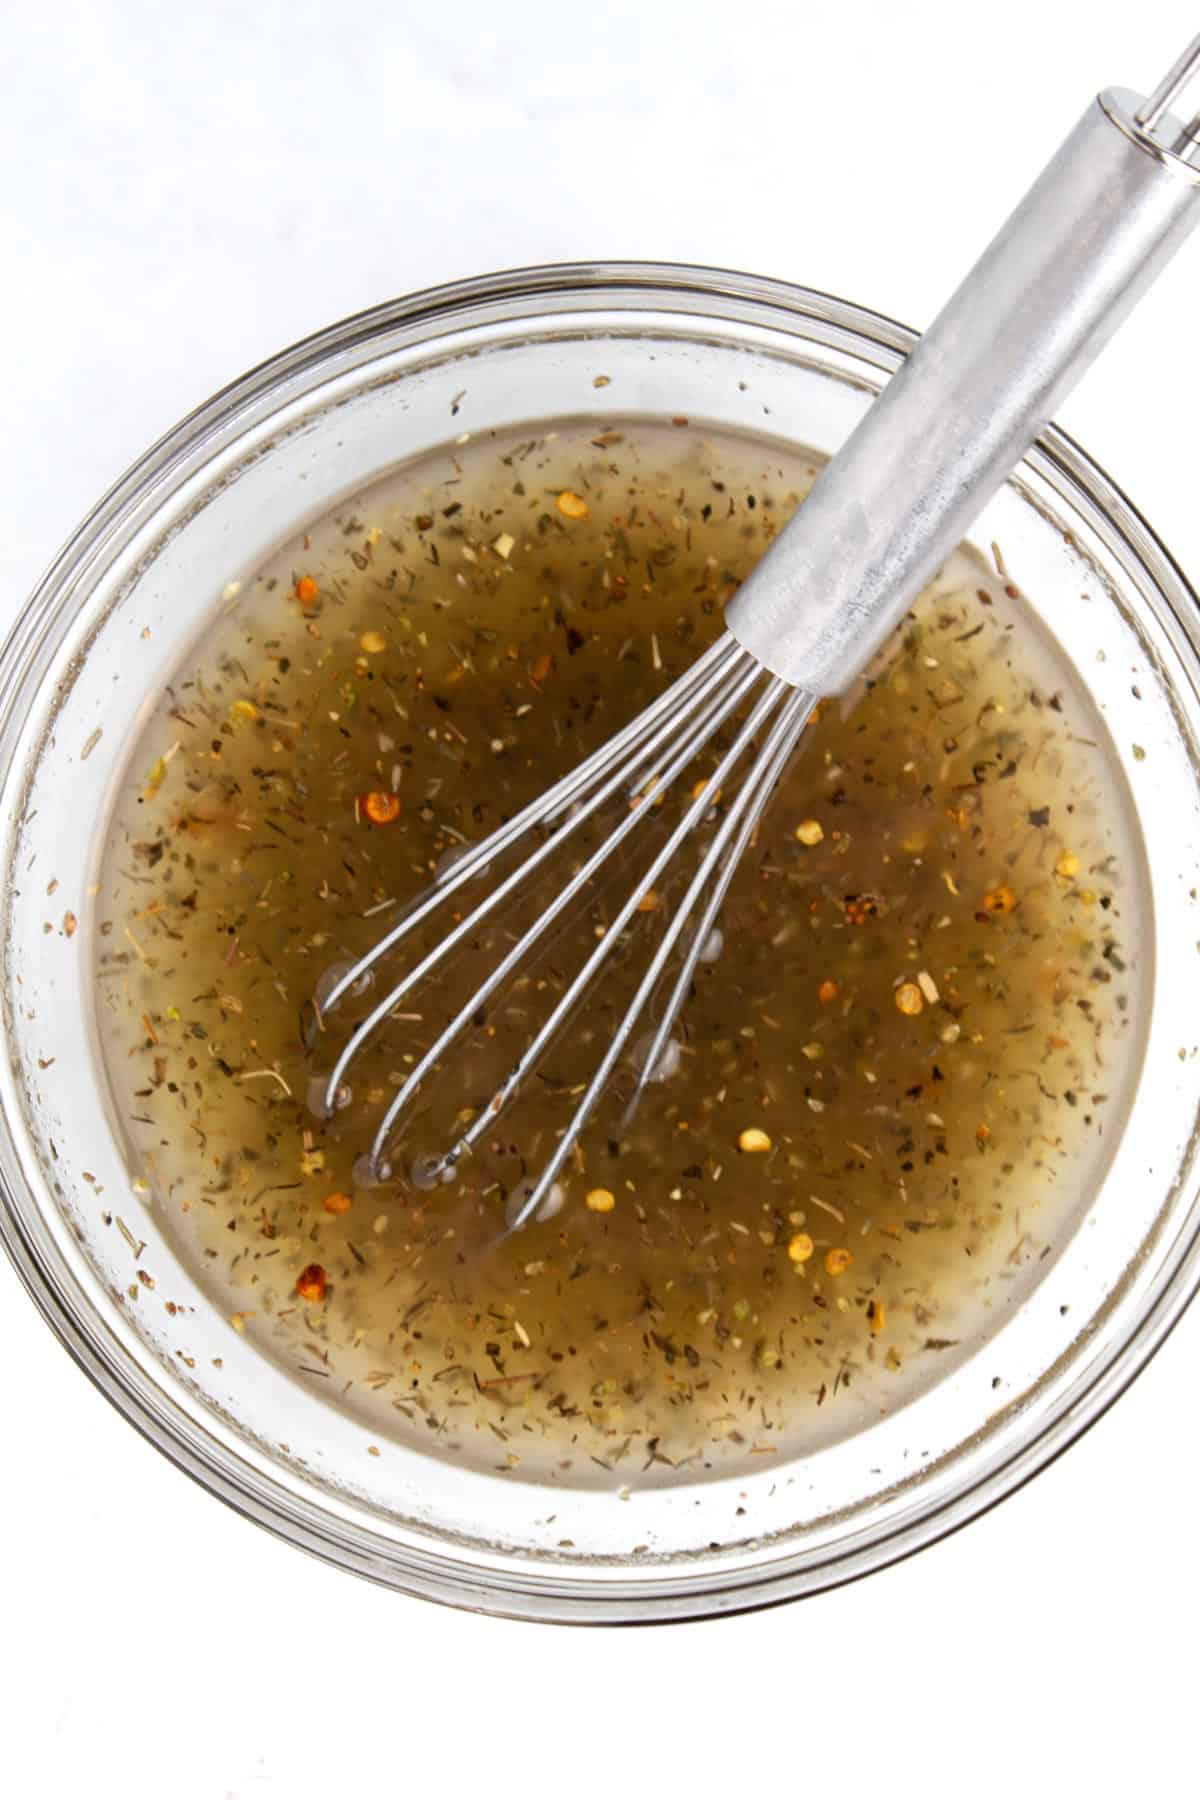 Overhead view of a clear glass bowl with an herby vinaigrette dressing and a whisk in the bowl.